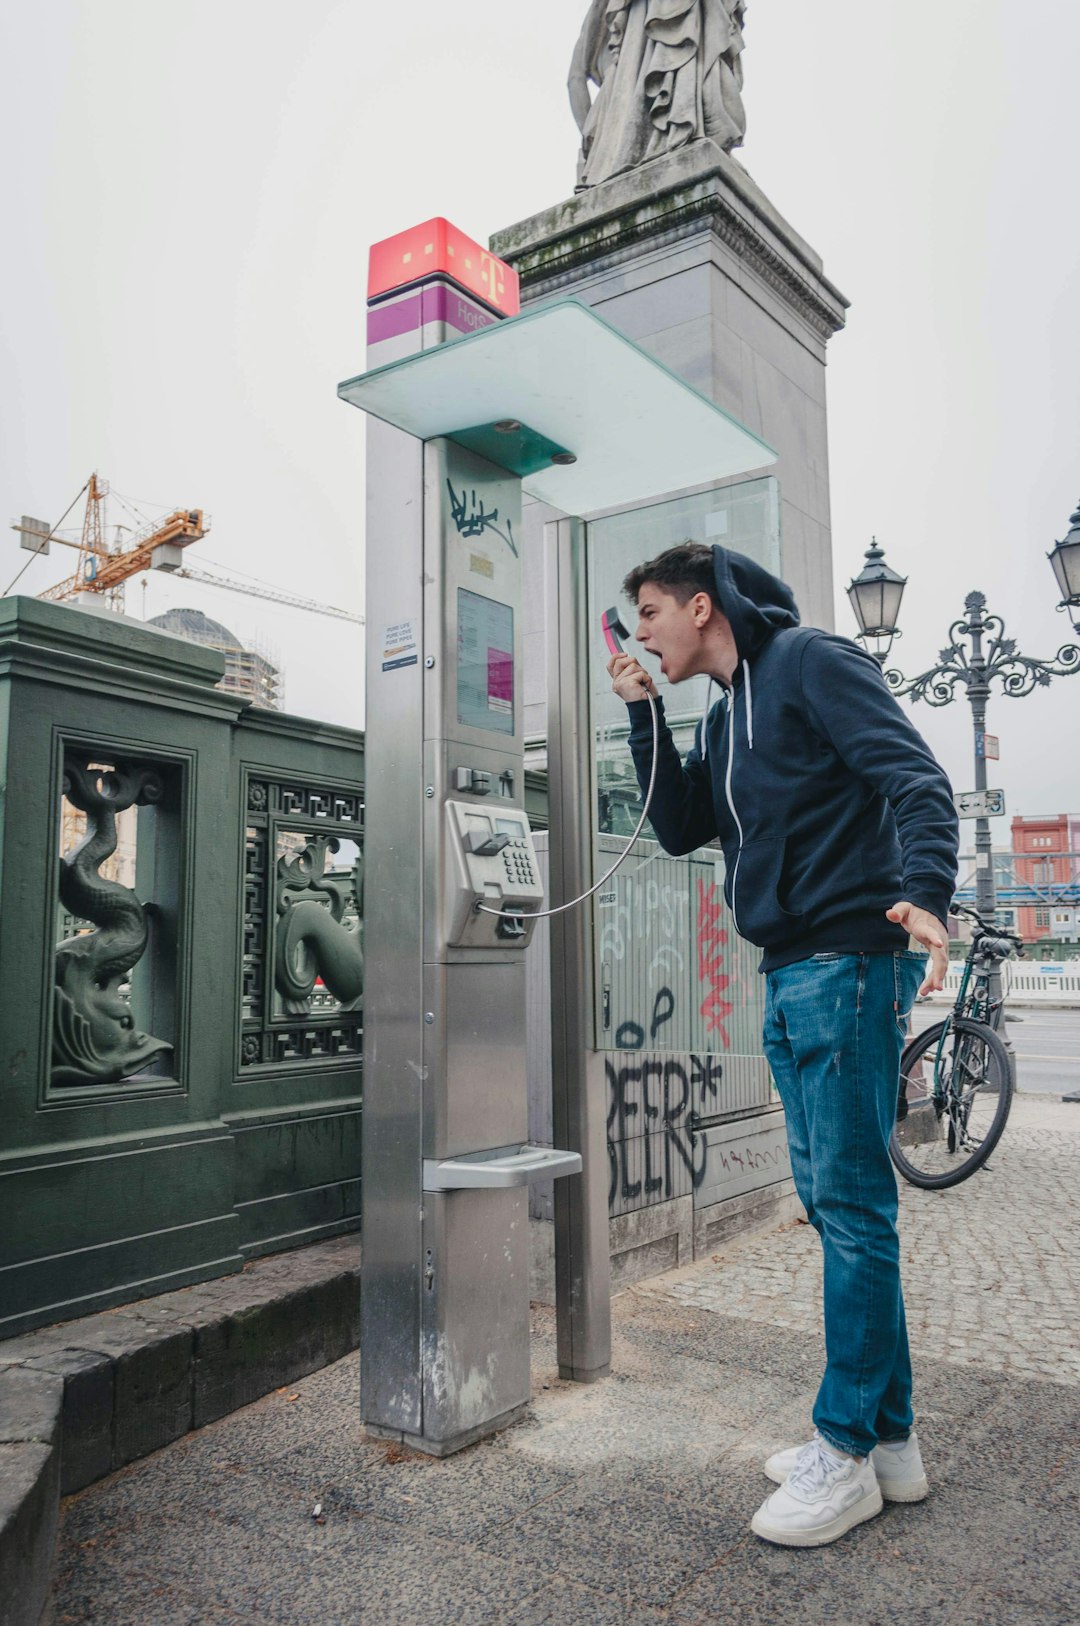 A walk on the streets of Berlin turned into a fun series of photos with my friends. You used to call me on my...